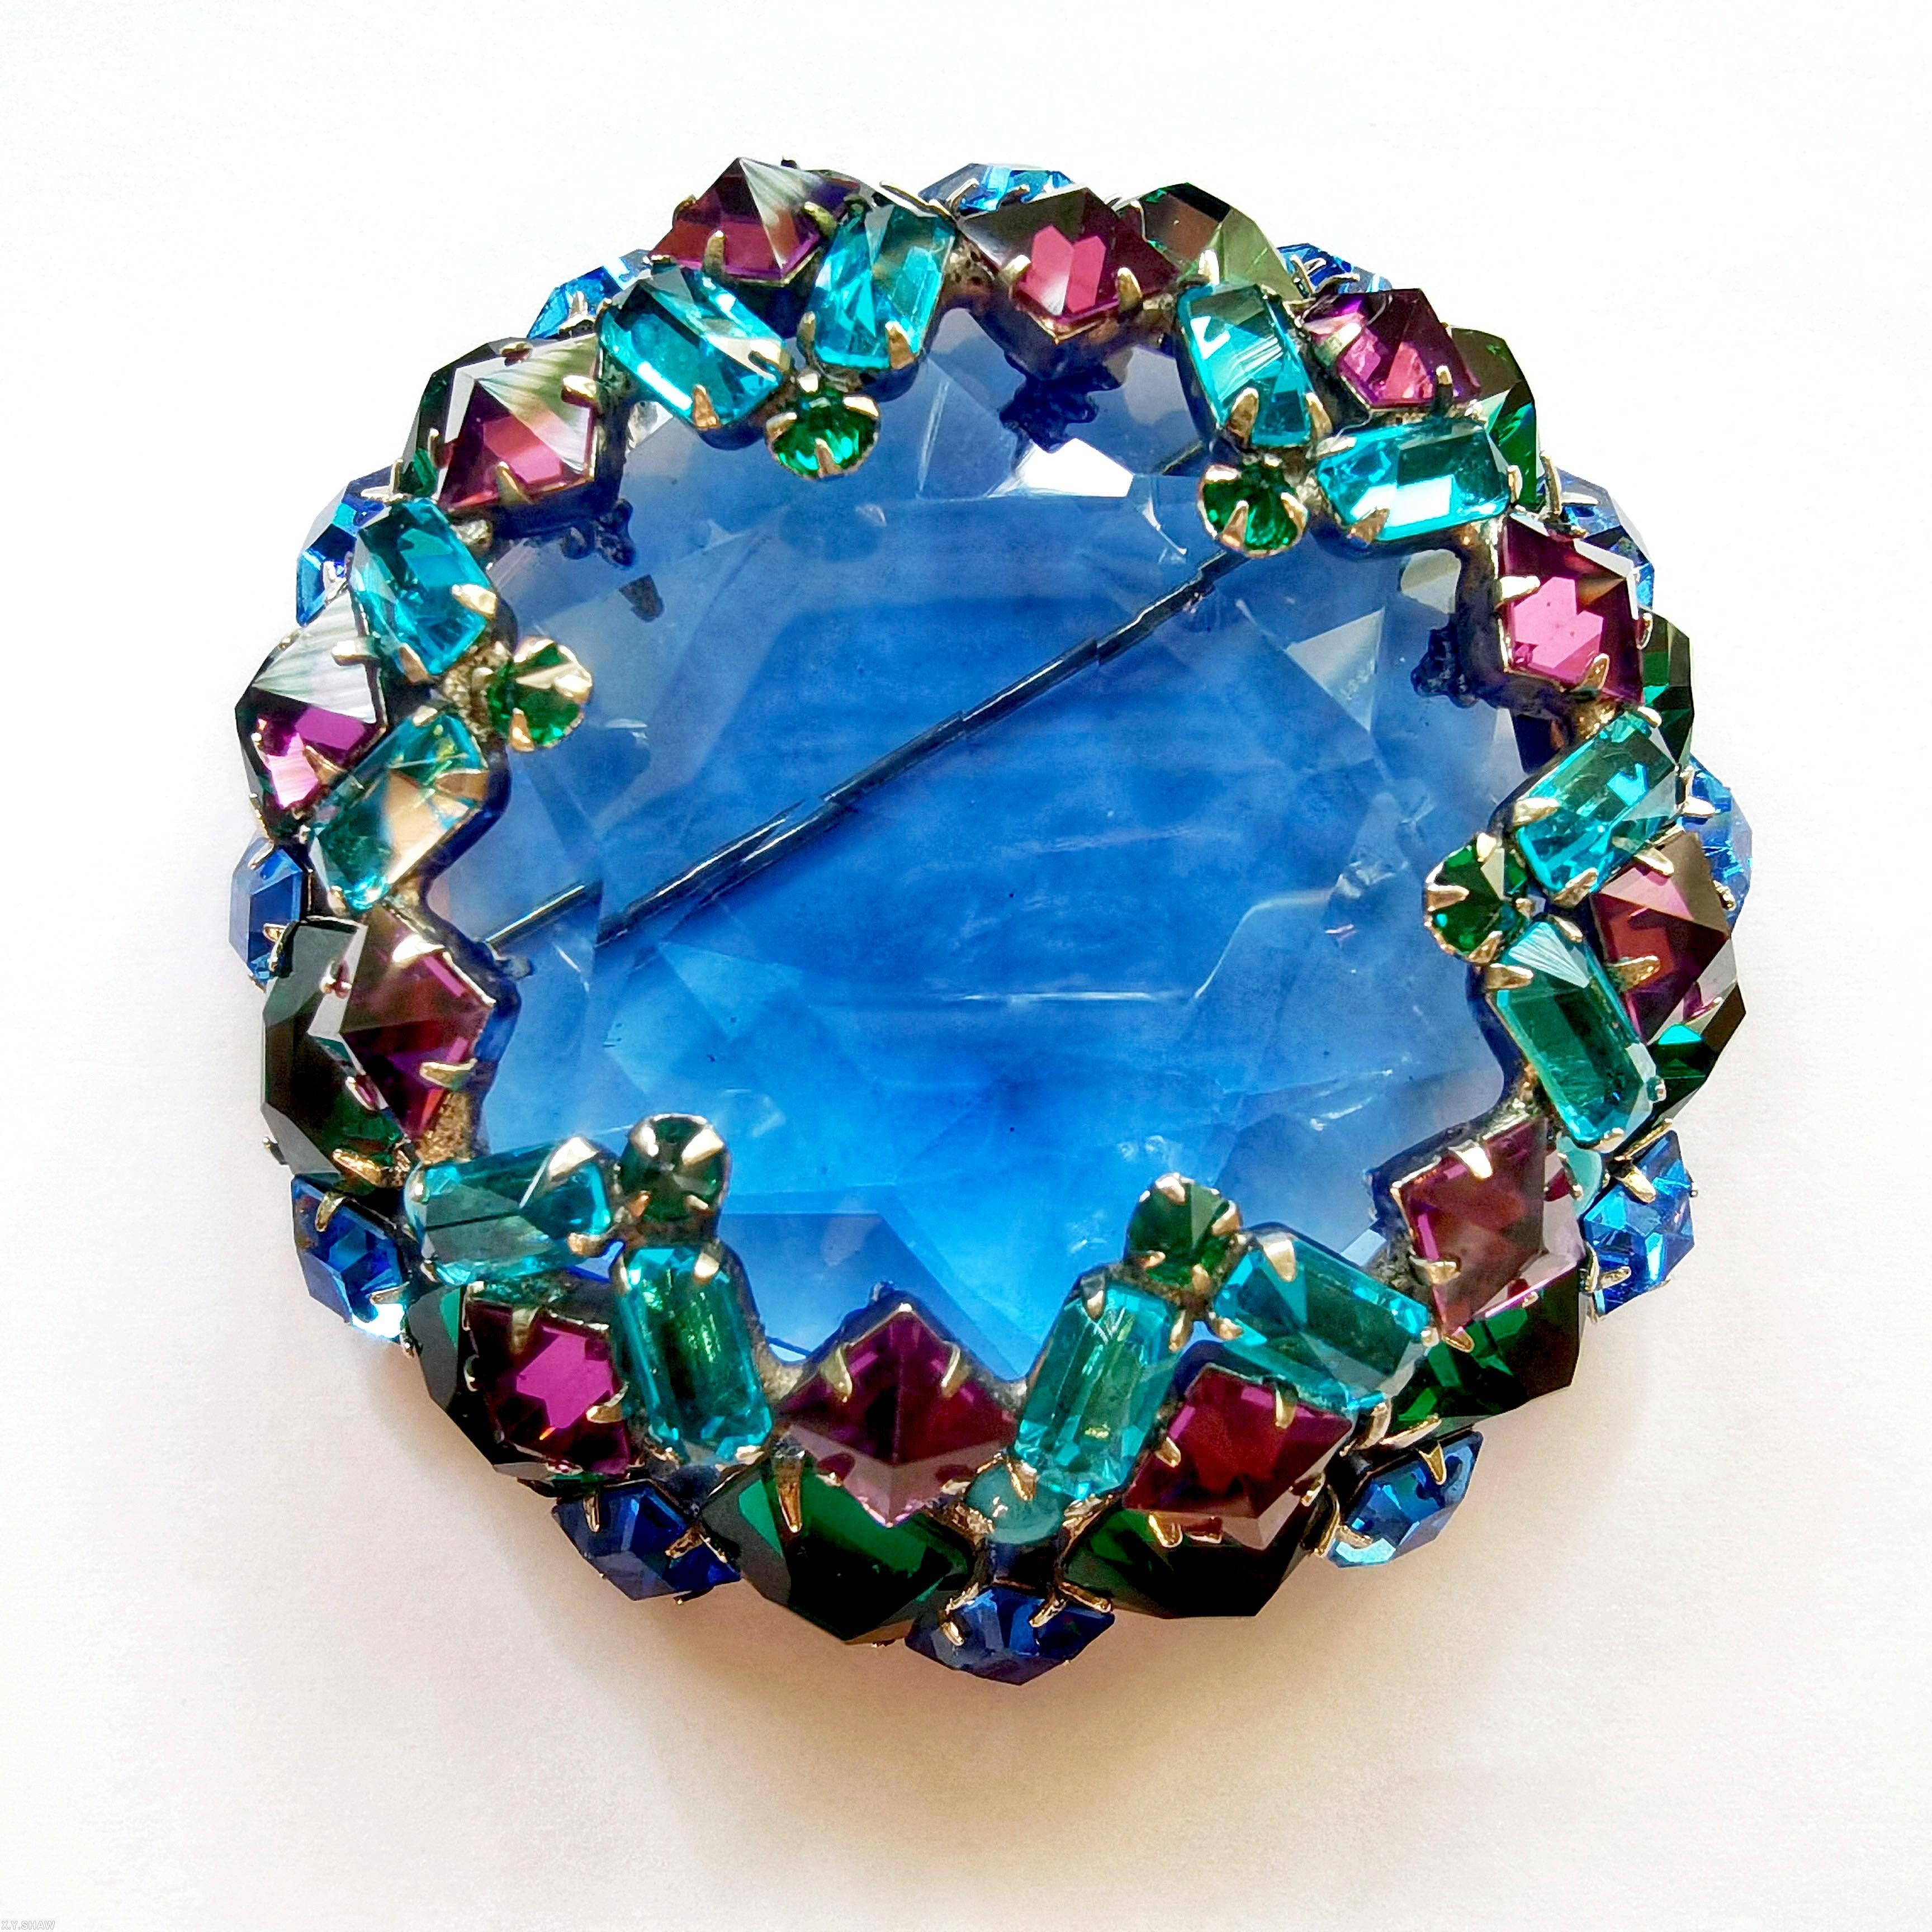 Schreiner large faceted open back center domed round pin 8 waves of seeds 16 oval stone side clear navy hexagonal faceted crystal center purple inverted square stone aqua clear faceted baguette opaque baby blue small chaton emeral colored emerald cut stone goldtone jewelry